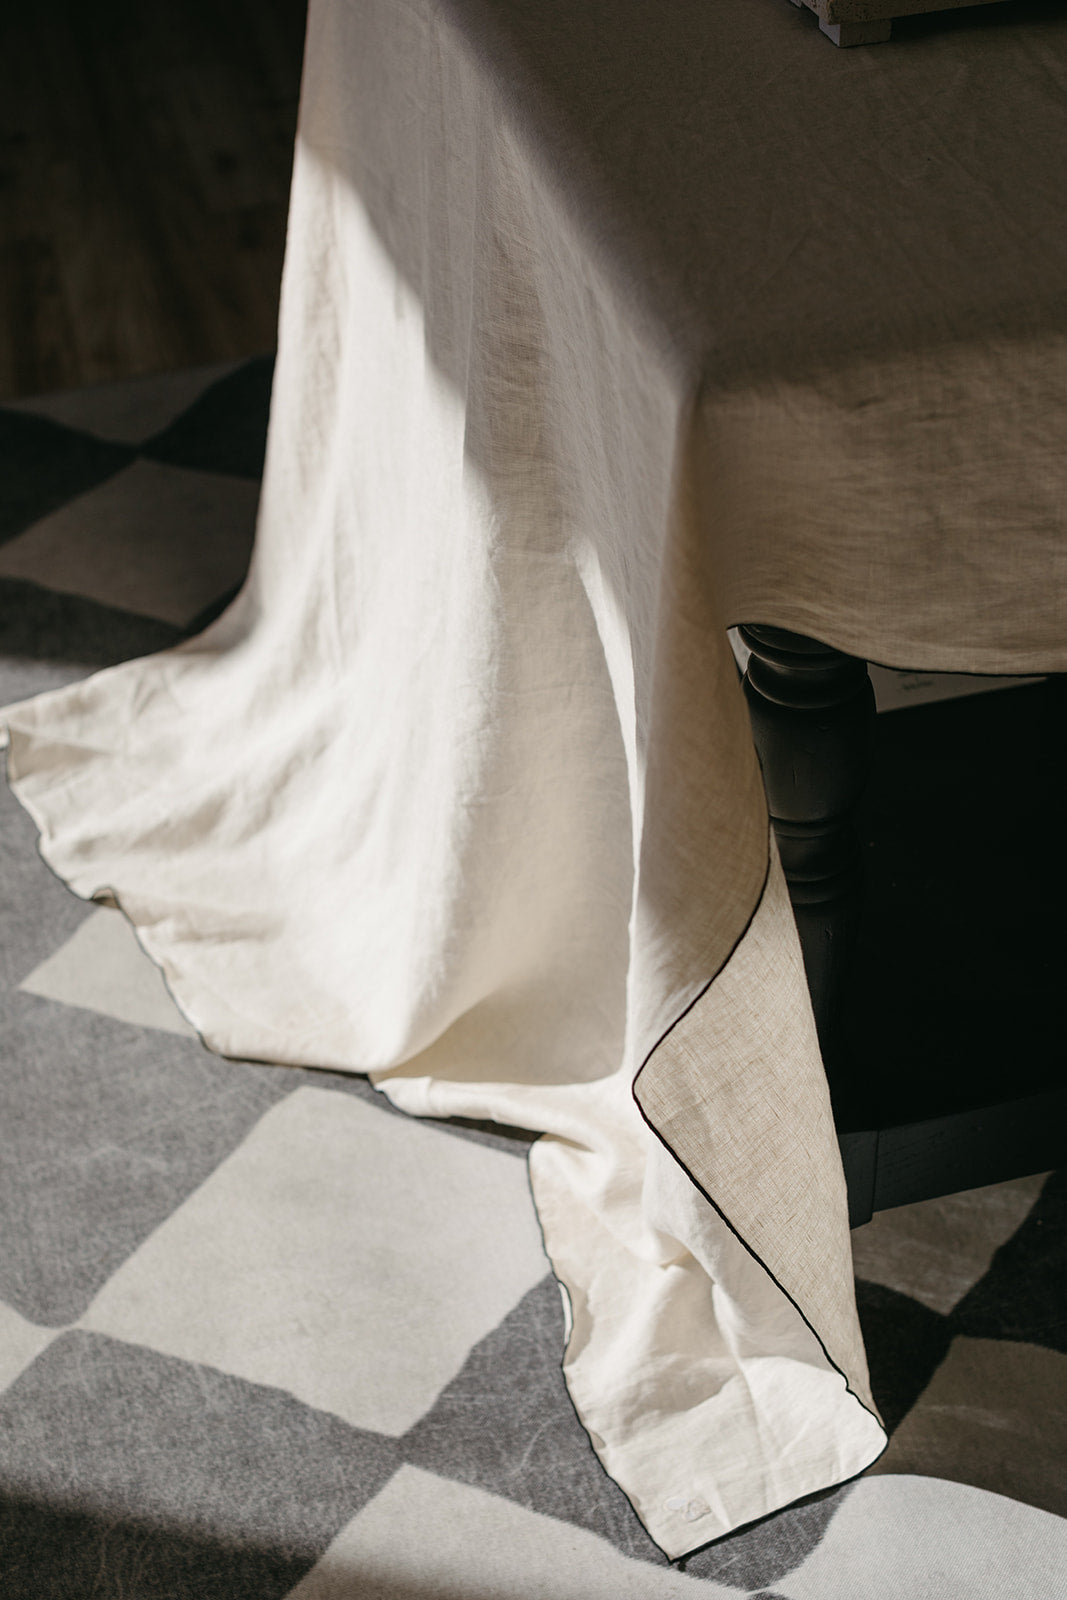 Stone Washed Linen Tablecloth | Cathedral + Black Trim